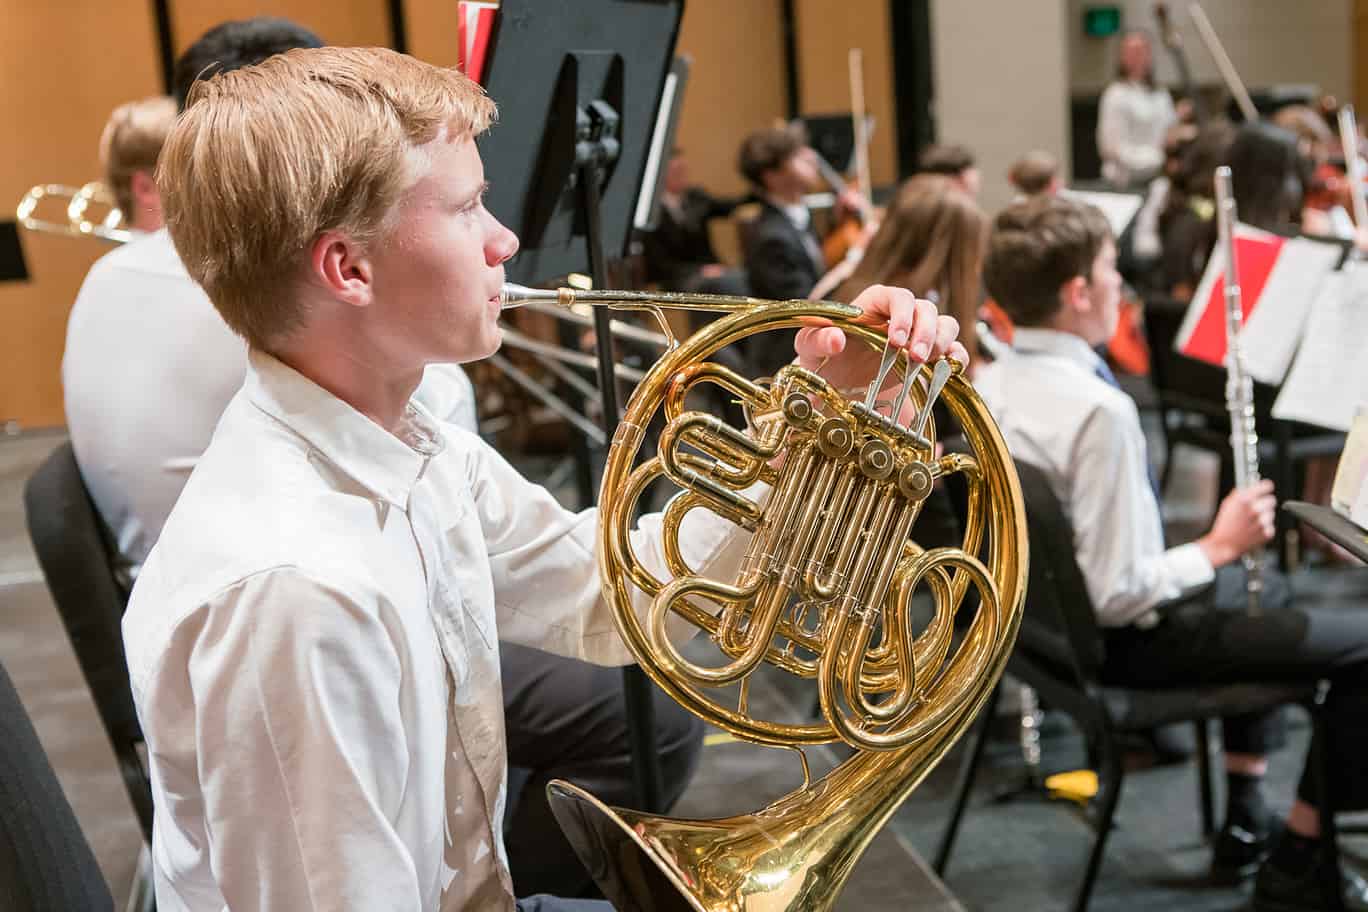 a young boy with blond hair plays french horn